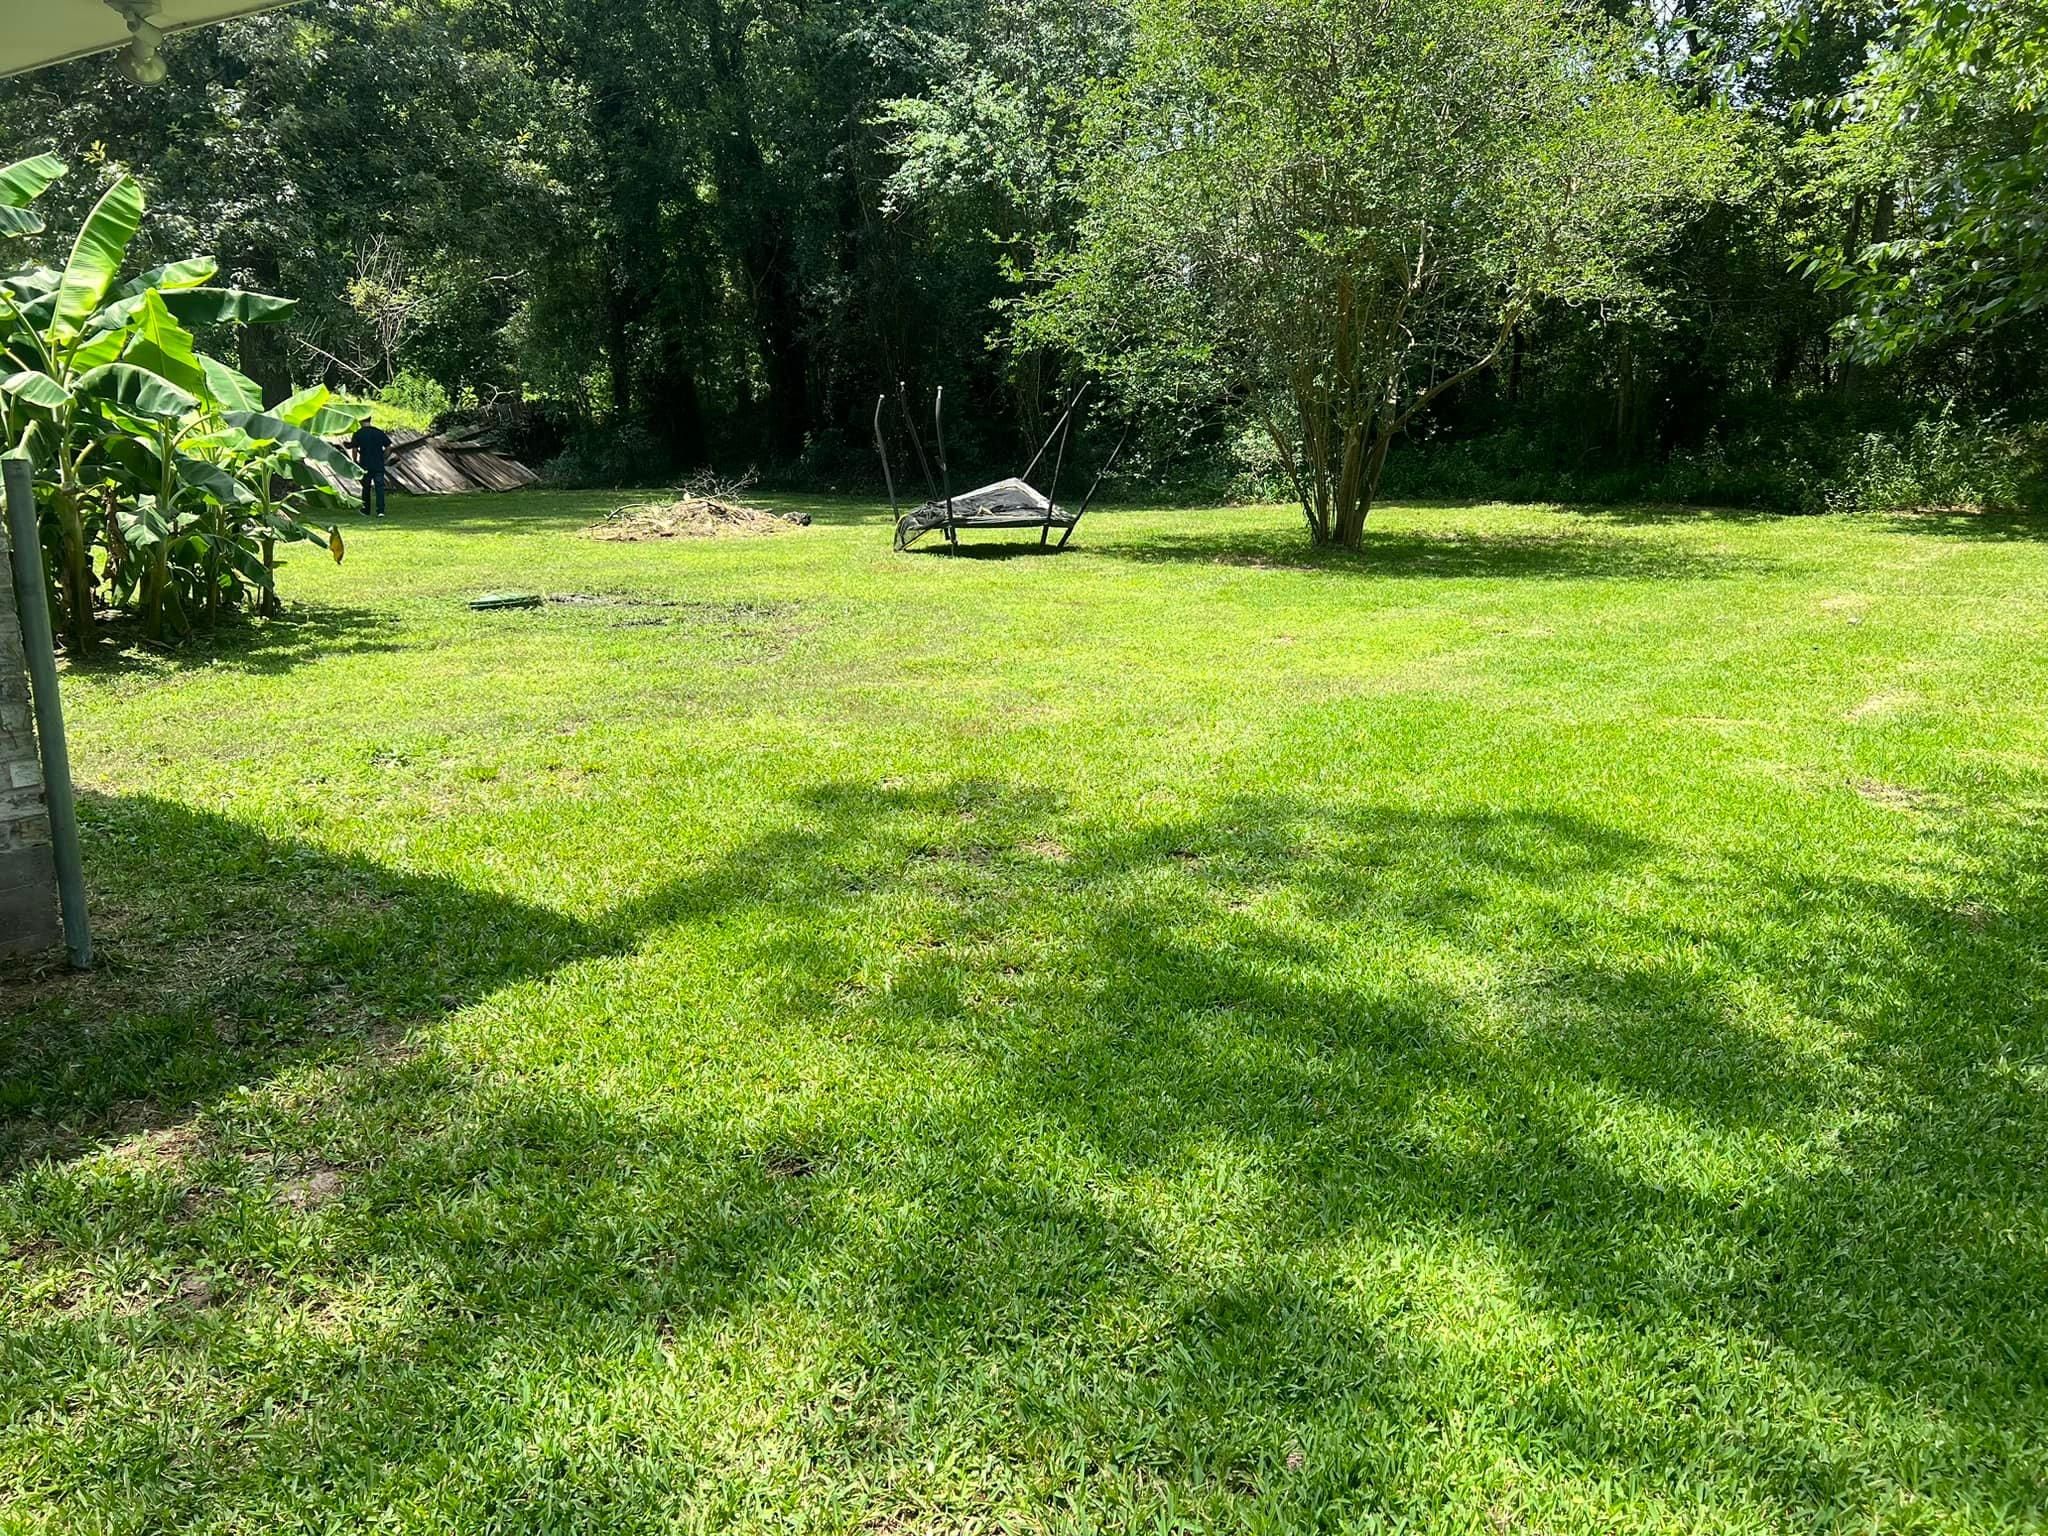 All Photos for Bobby’s lawn services in Baytown, TX